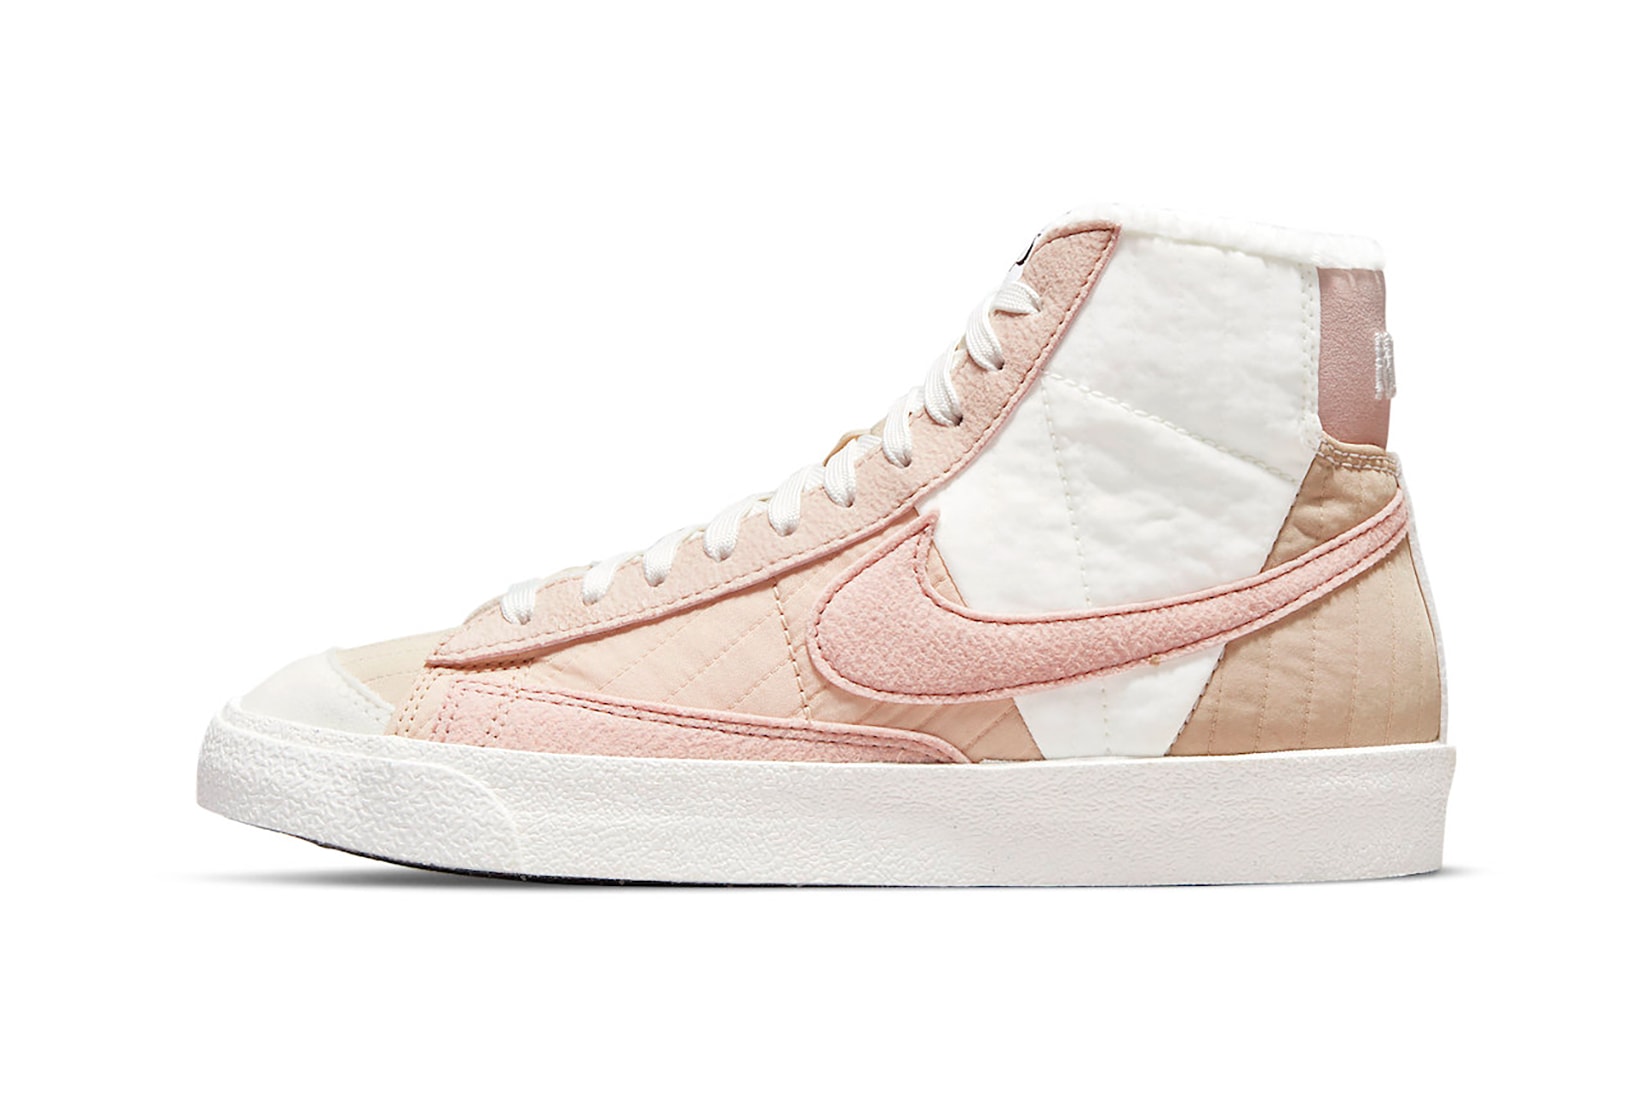 Nike Blazer Mid Toasty Pink White Womens Sneakers Kicks Shoes Footwear Shoes Lateral